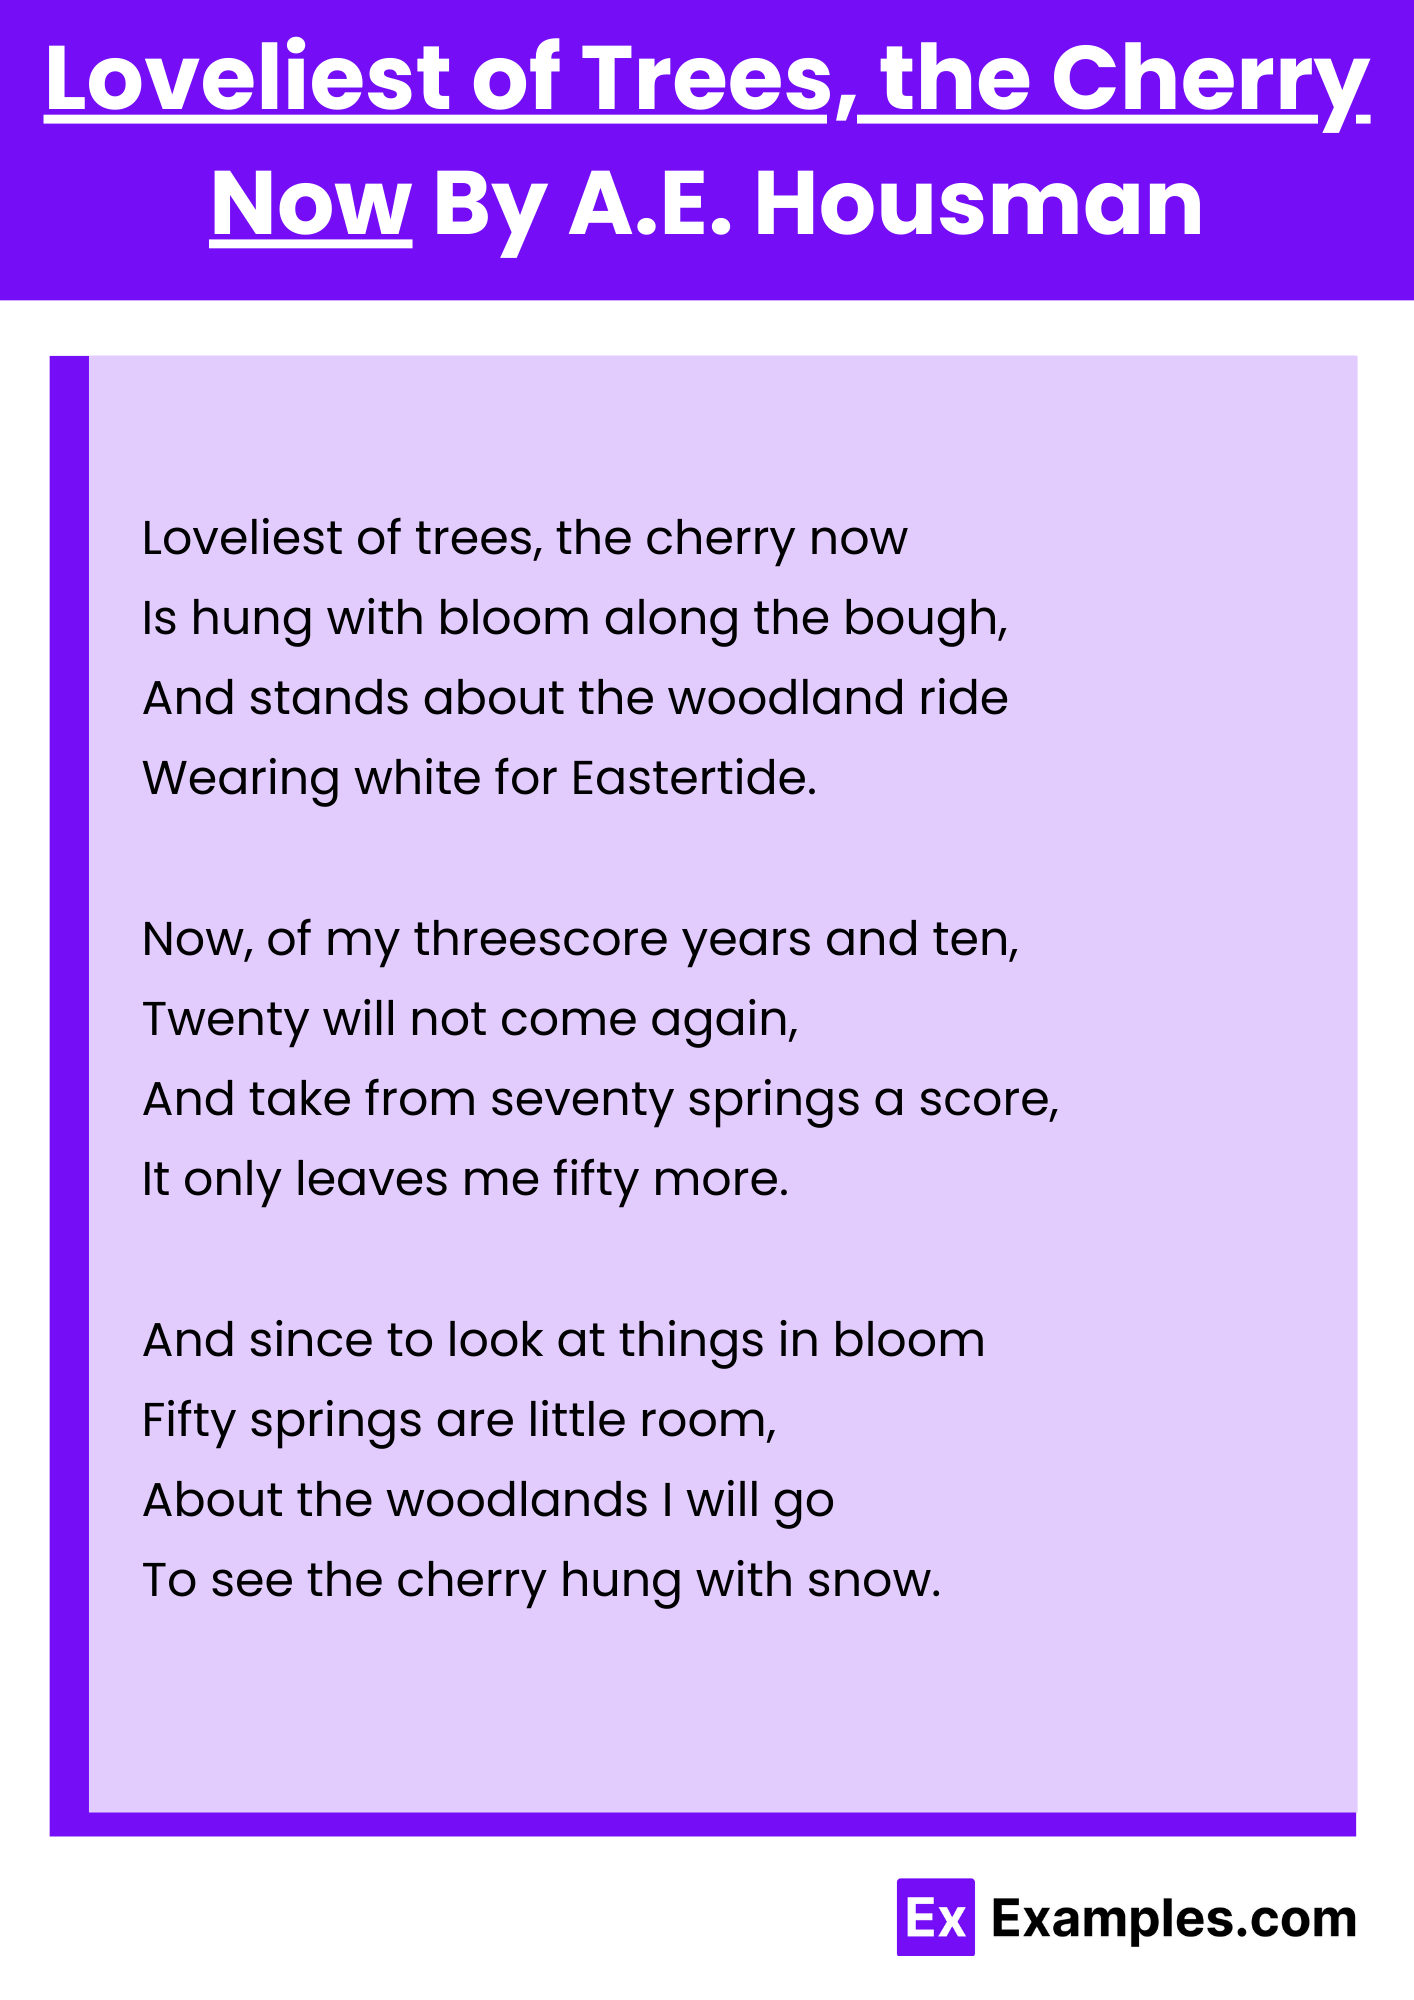 Loveliest of Trees, the Cherry Now By A.E. Housman